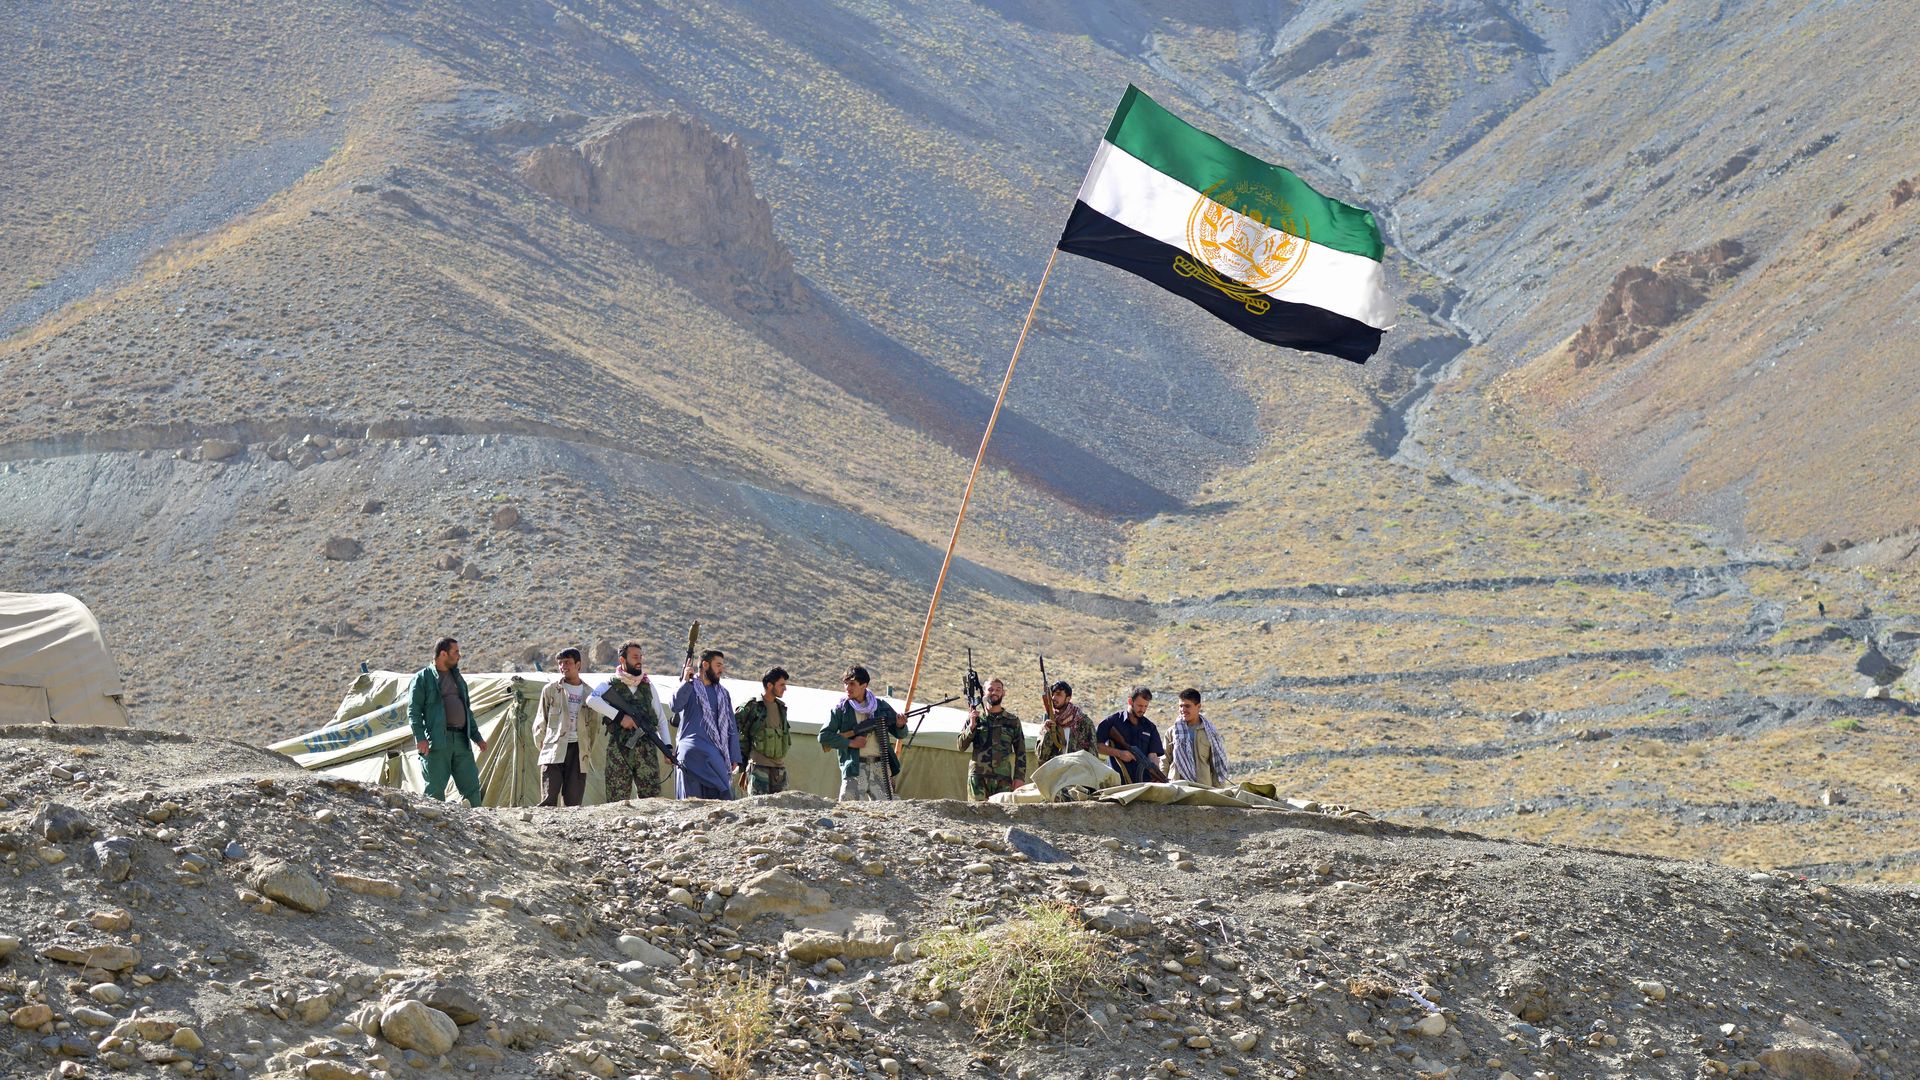 Afghan resistance movement and anti-Taliban uprising forces stand guard on a hilltop in the Astana area of Bazarak in Panjshir province on August 27